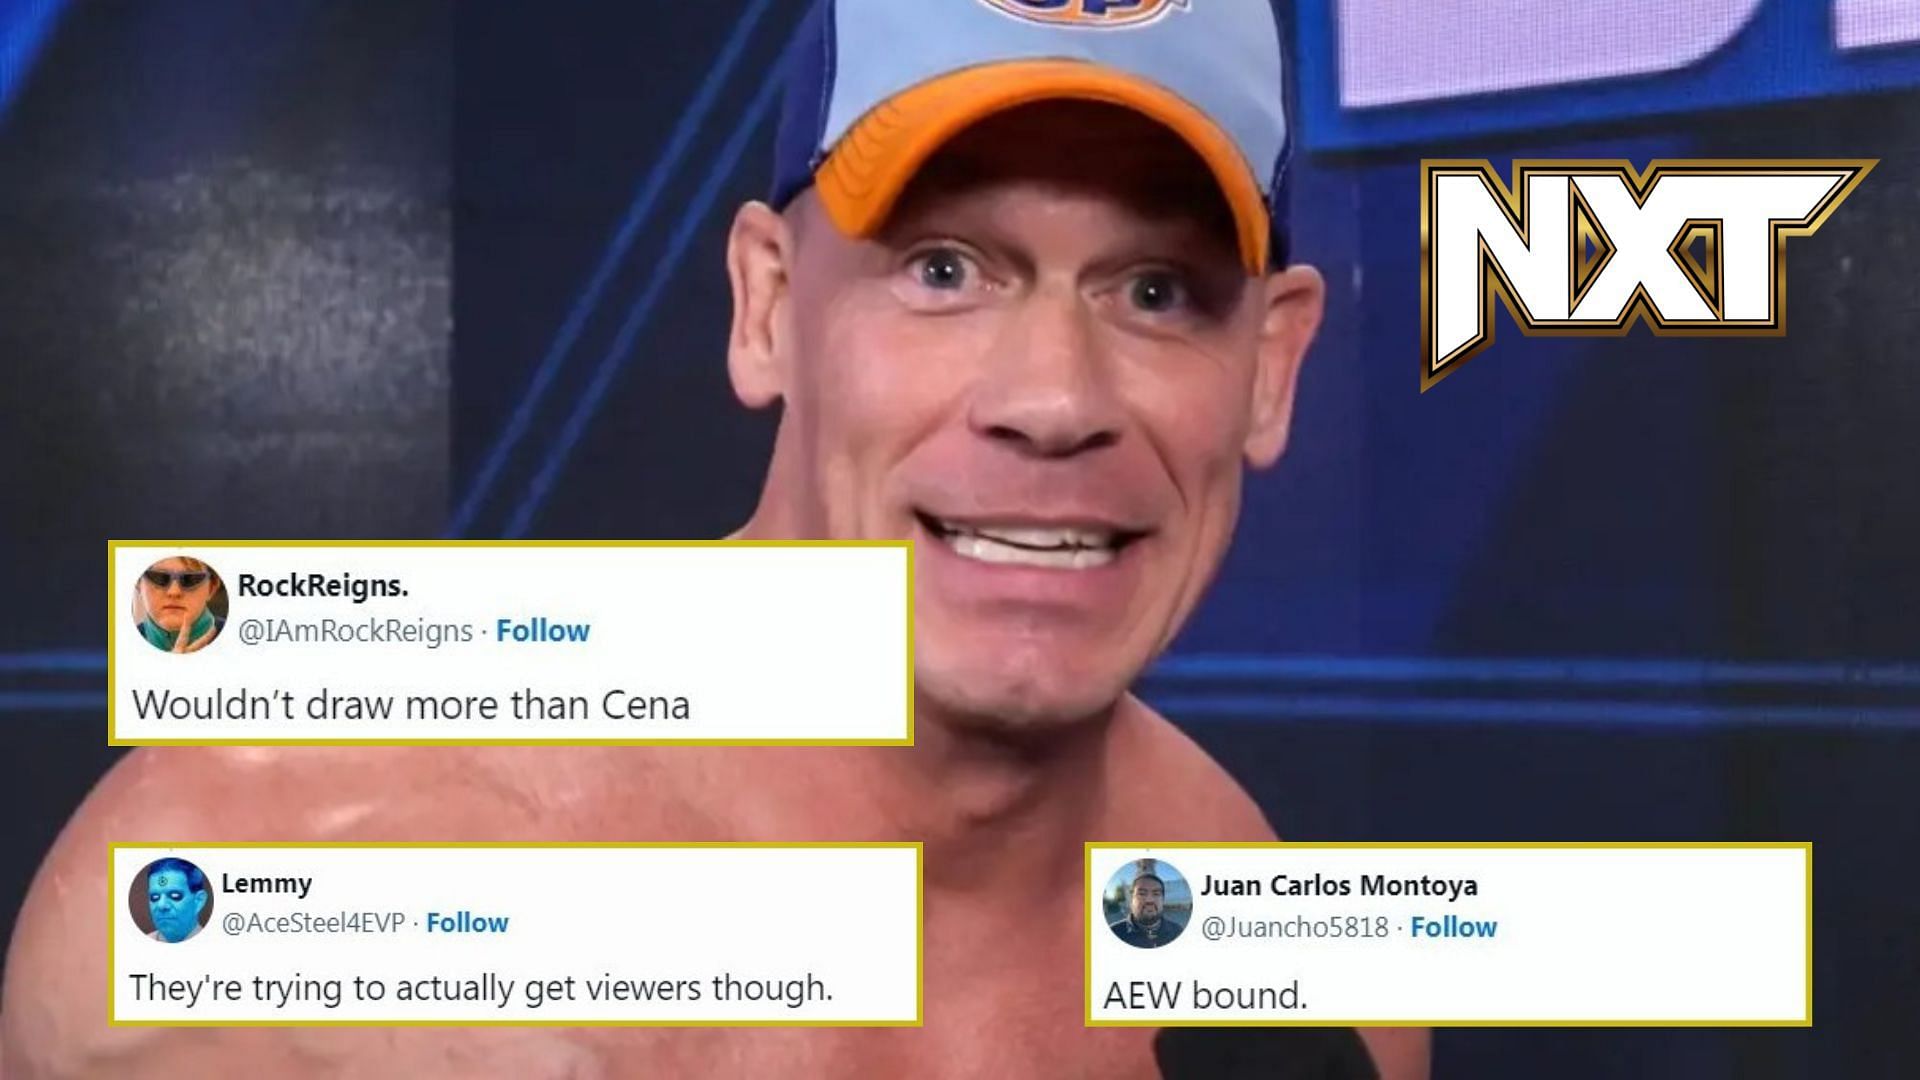 Mercedes Mone's AEW Buzz: Will She Steal the Spotlight from NXT's Cena Return?